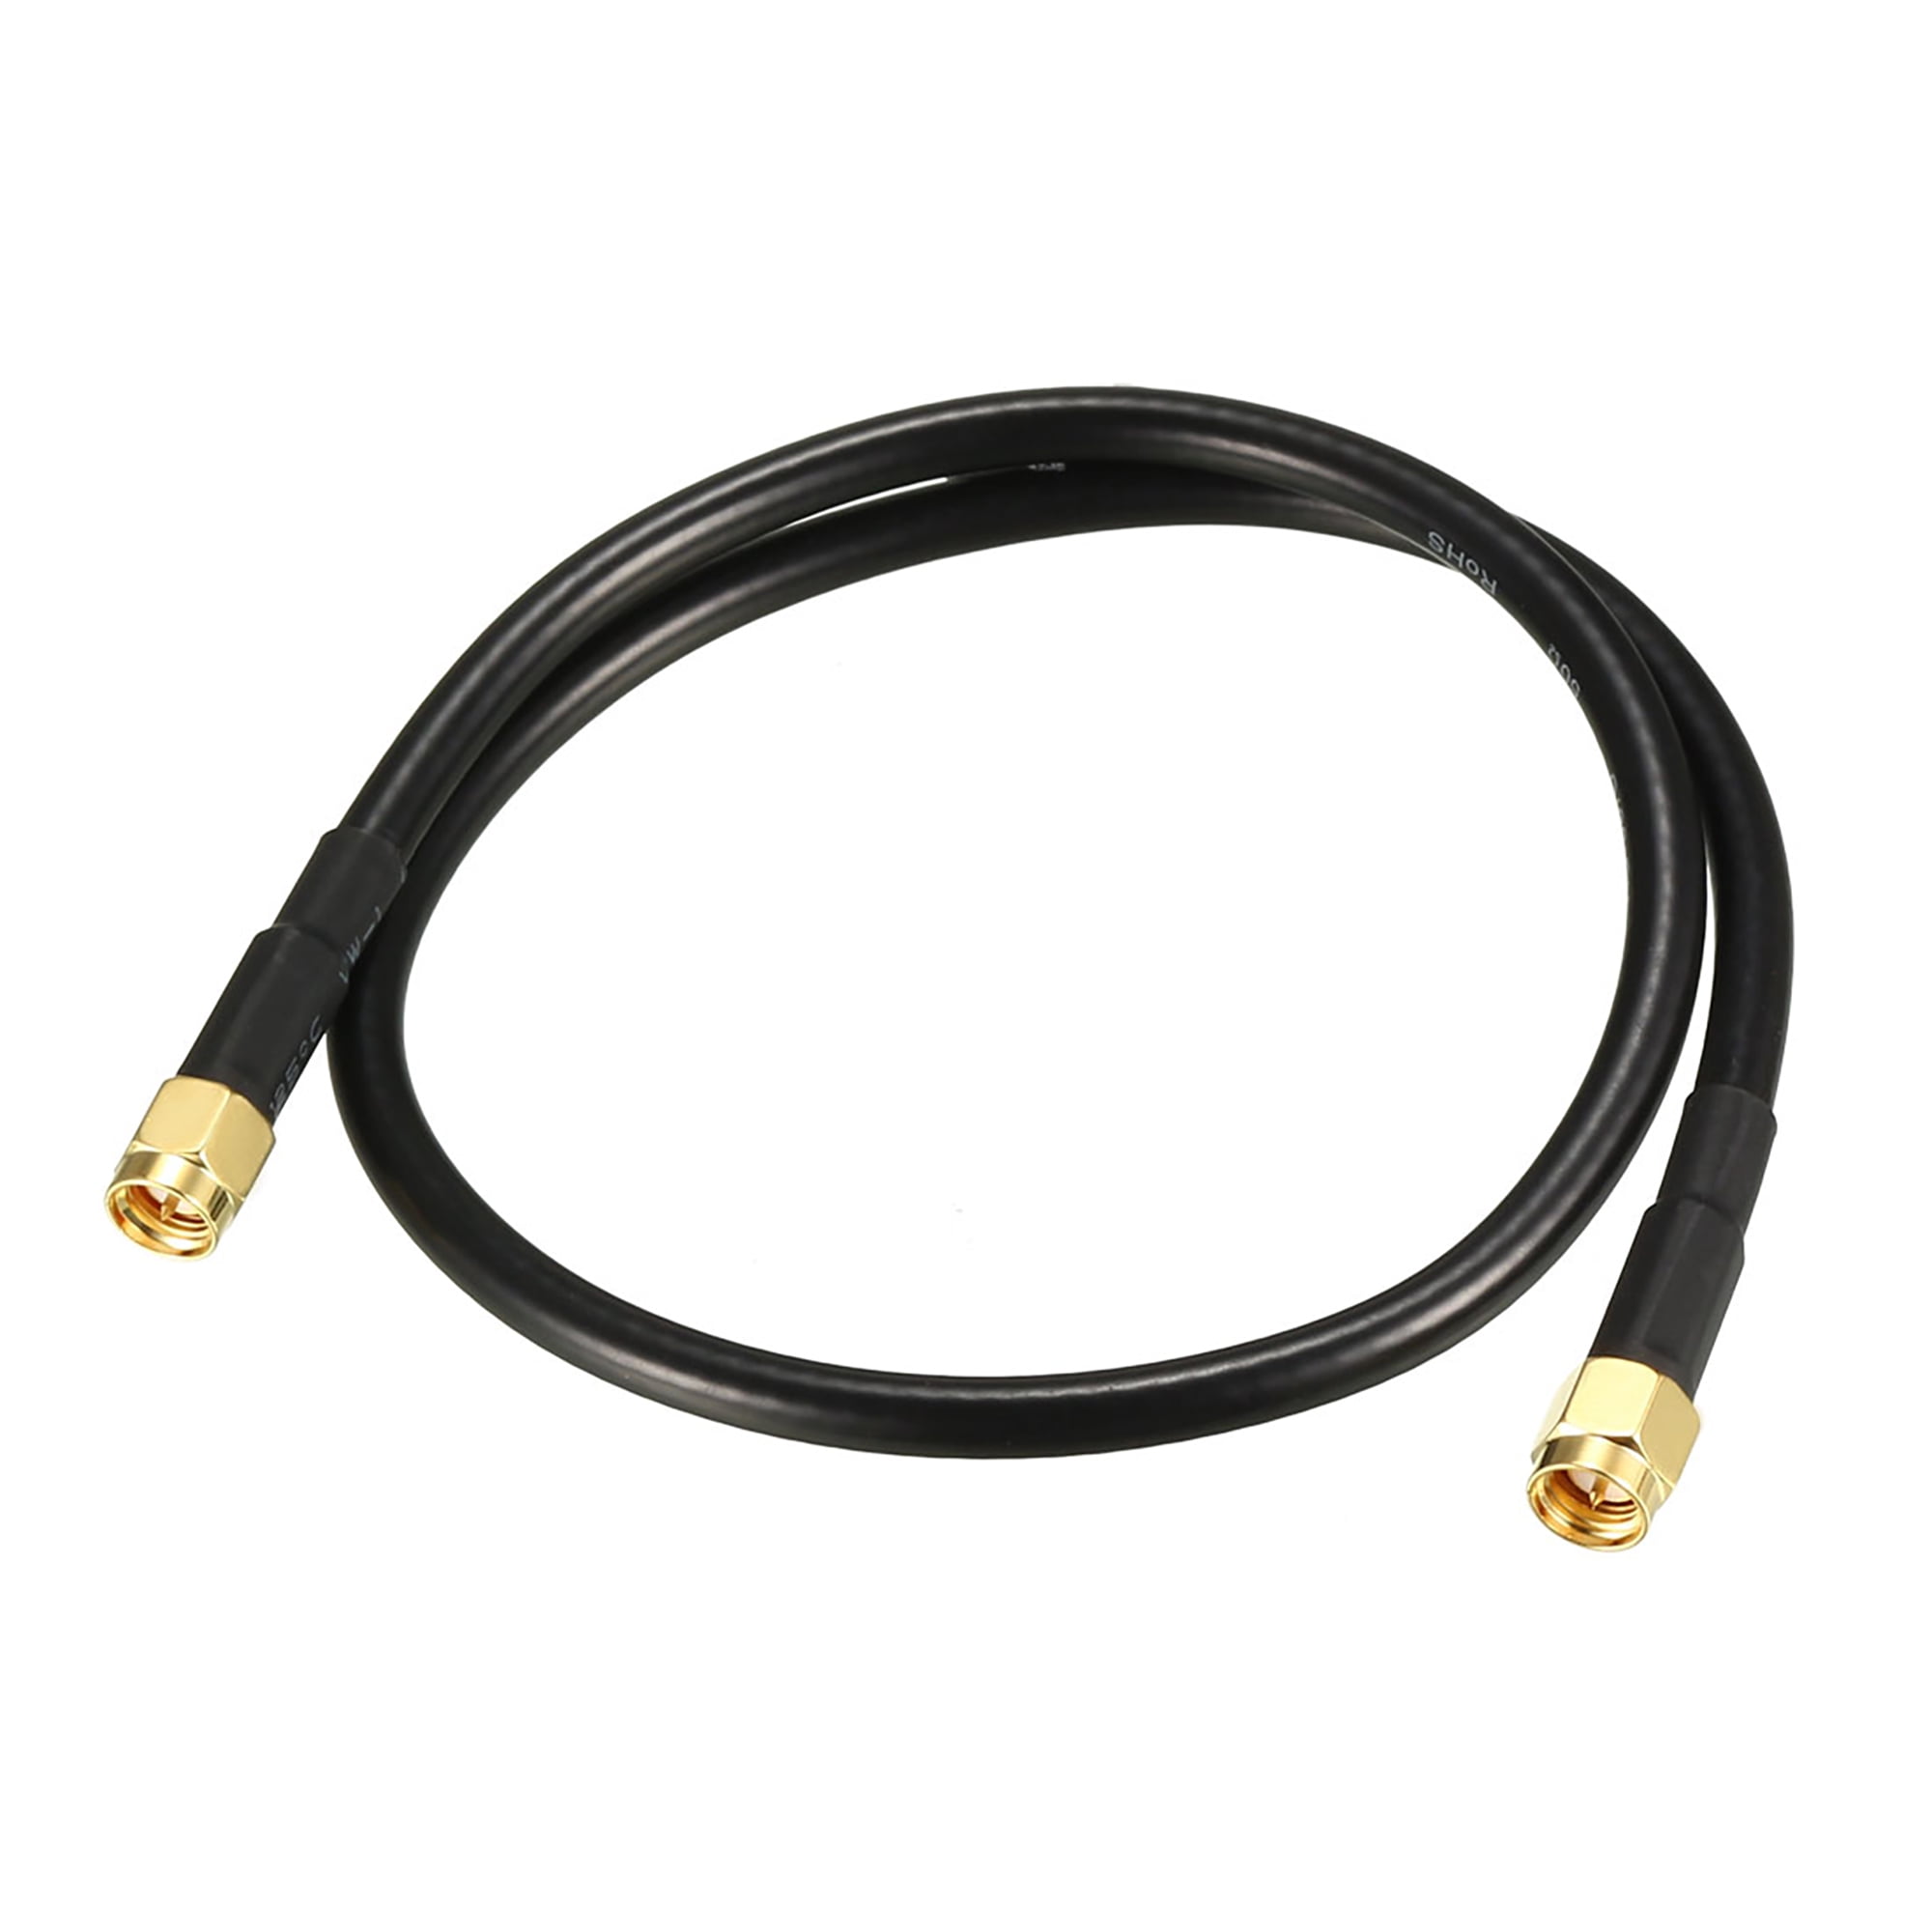 10M/33ft Antenna Connector RP-SMA Extension Cable Cord For WiFi Wireless Roull' 